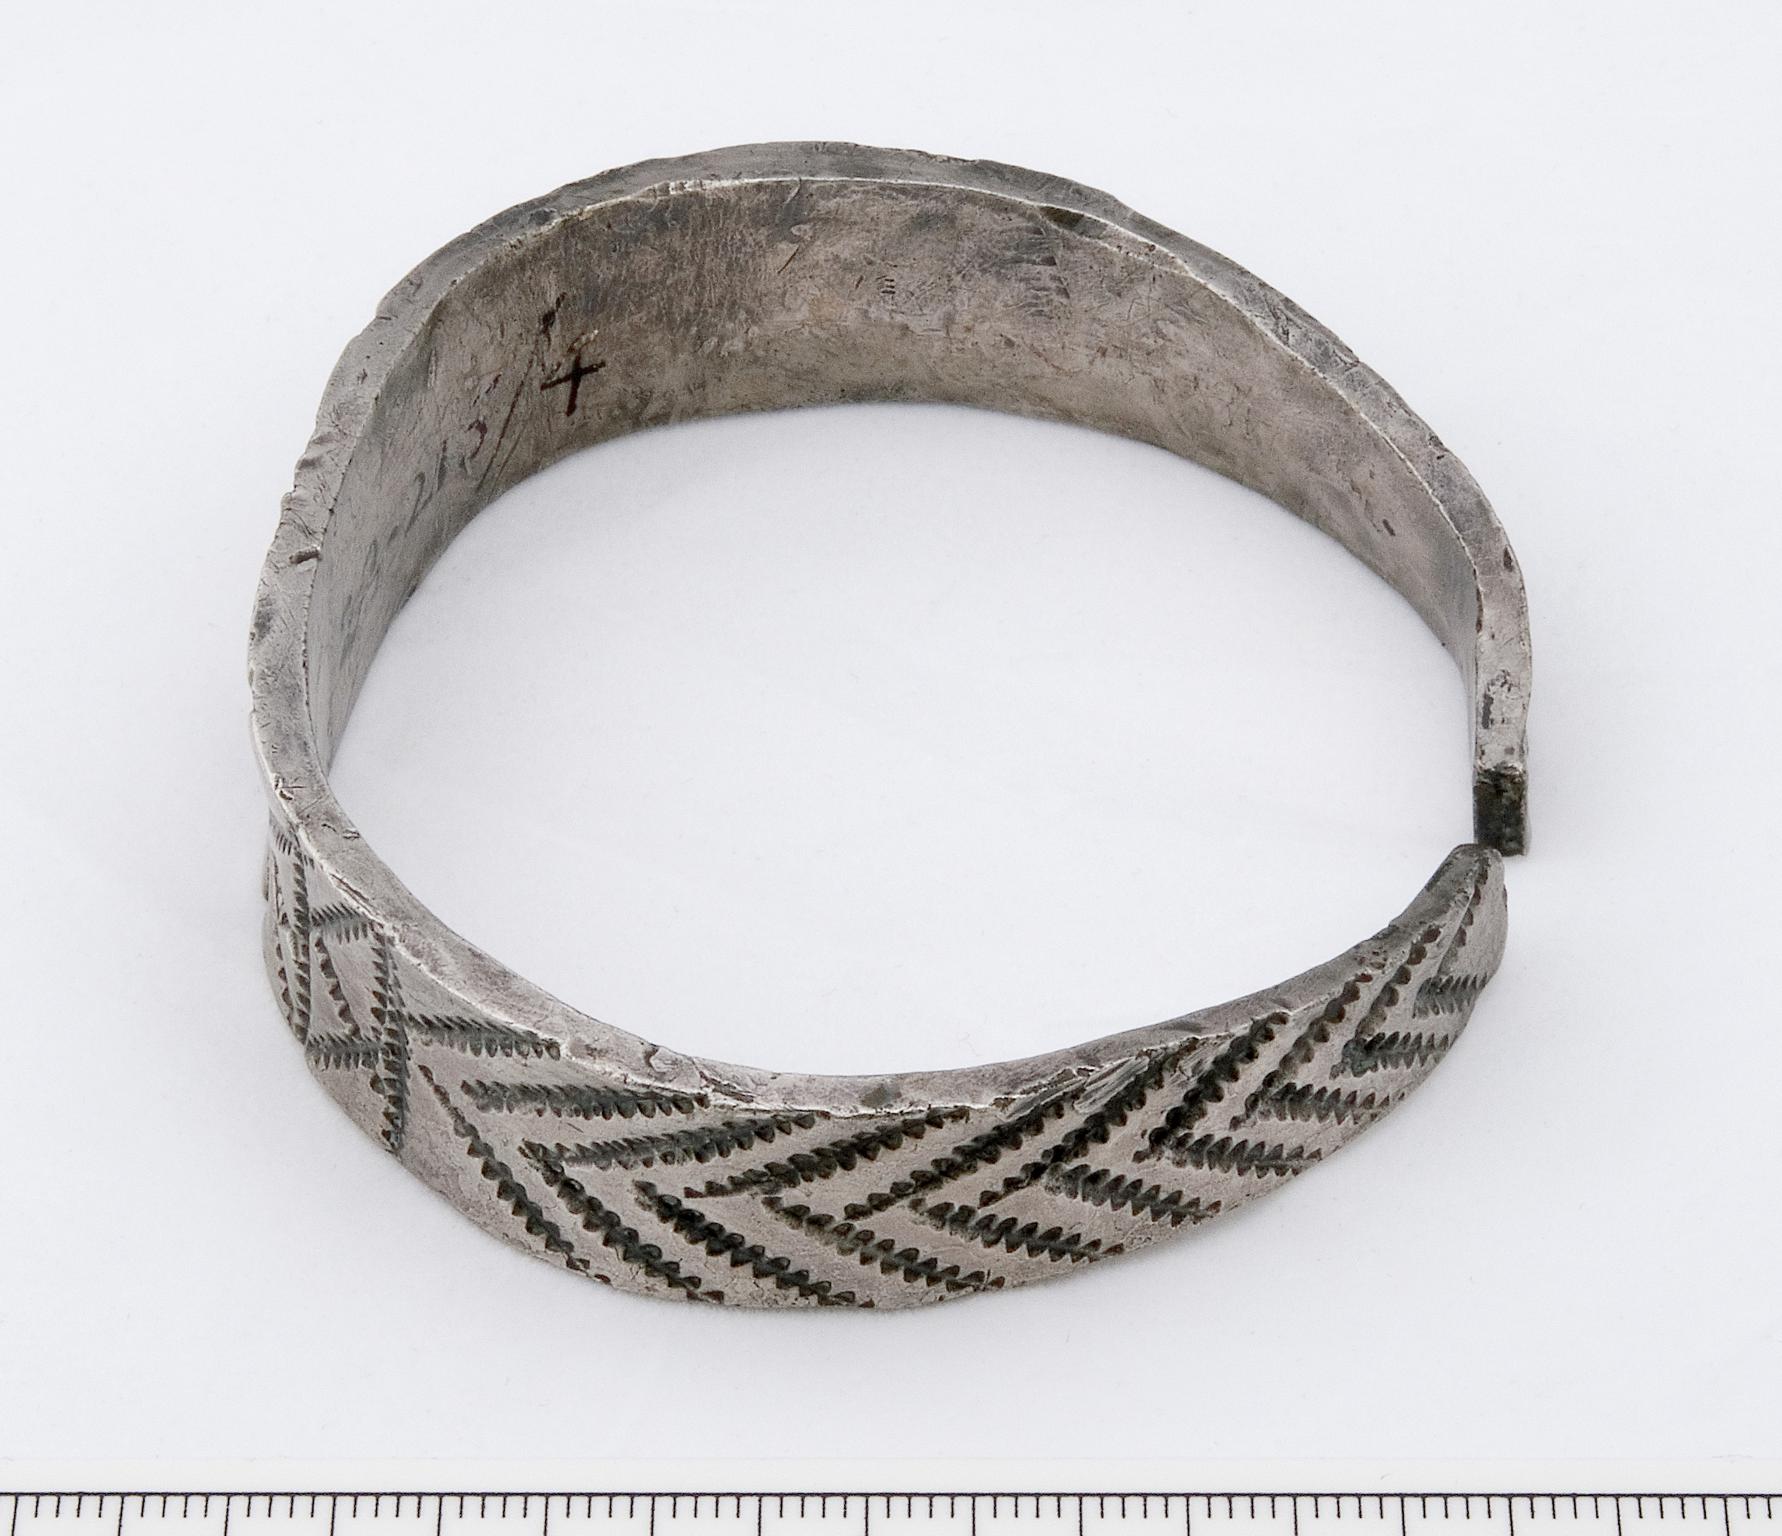 Early Medieval silver arm ring